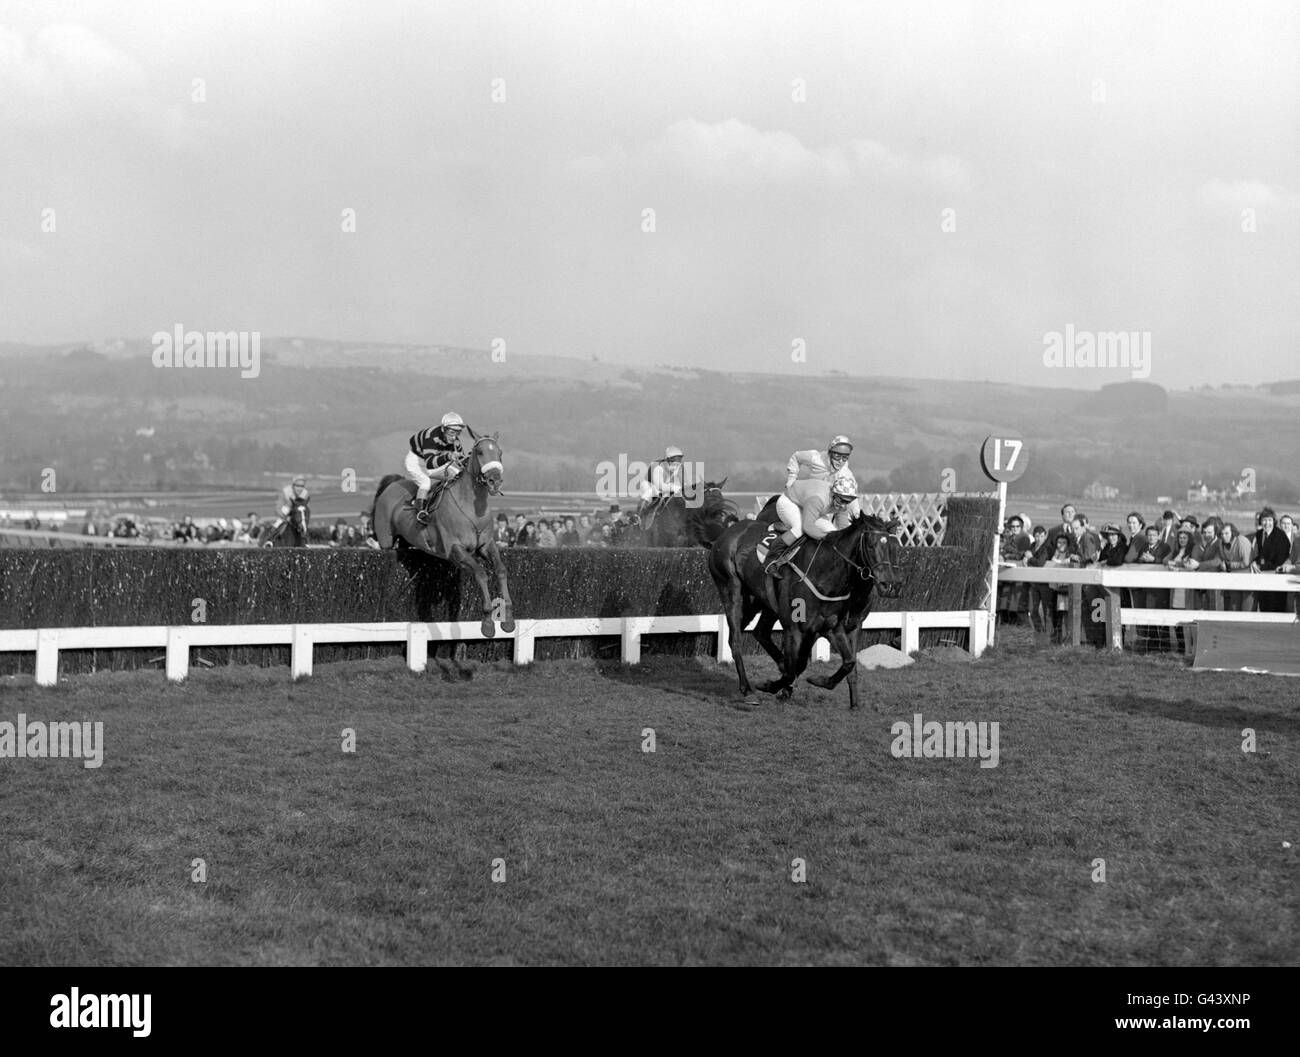 'Crisp' (2), Richard Pitman up leading over one of the fences from 'L'Escargot' (8), Tommy Carberry up (near side) 'Royal Toss' (9), Nigel Wakley up (far side) and 'Spanish Steps' (10), Bill Smith up. Stock Photo